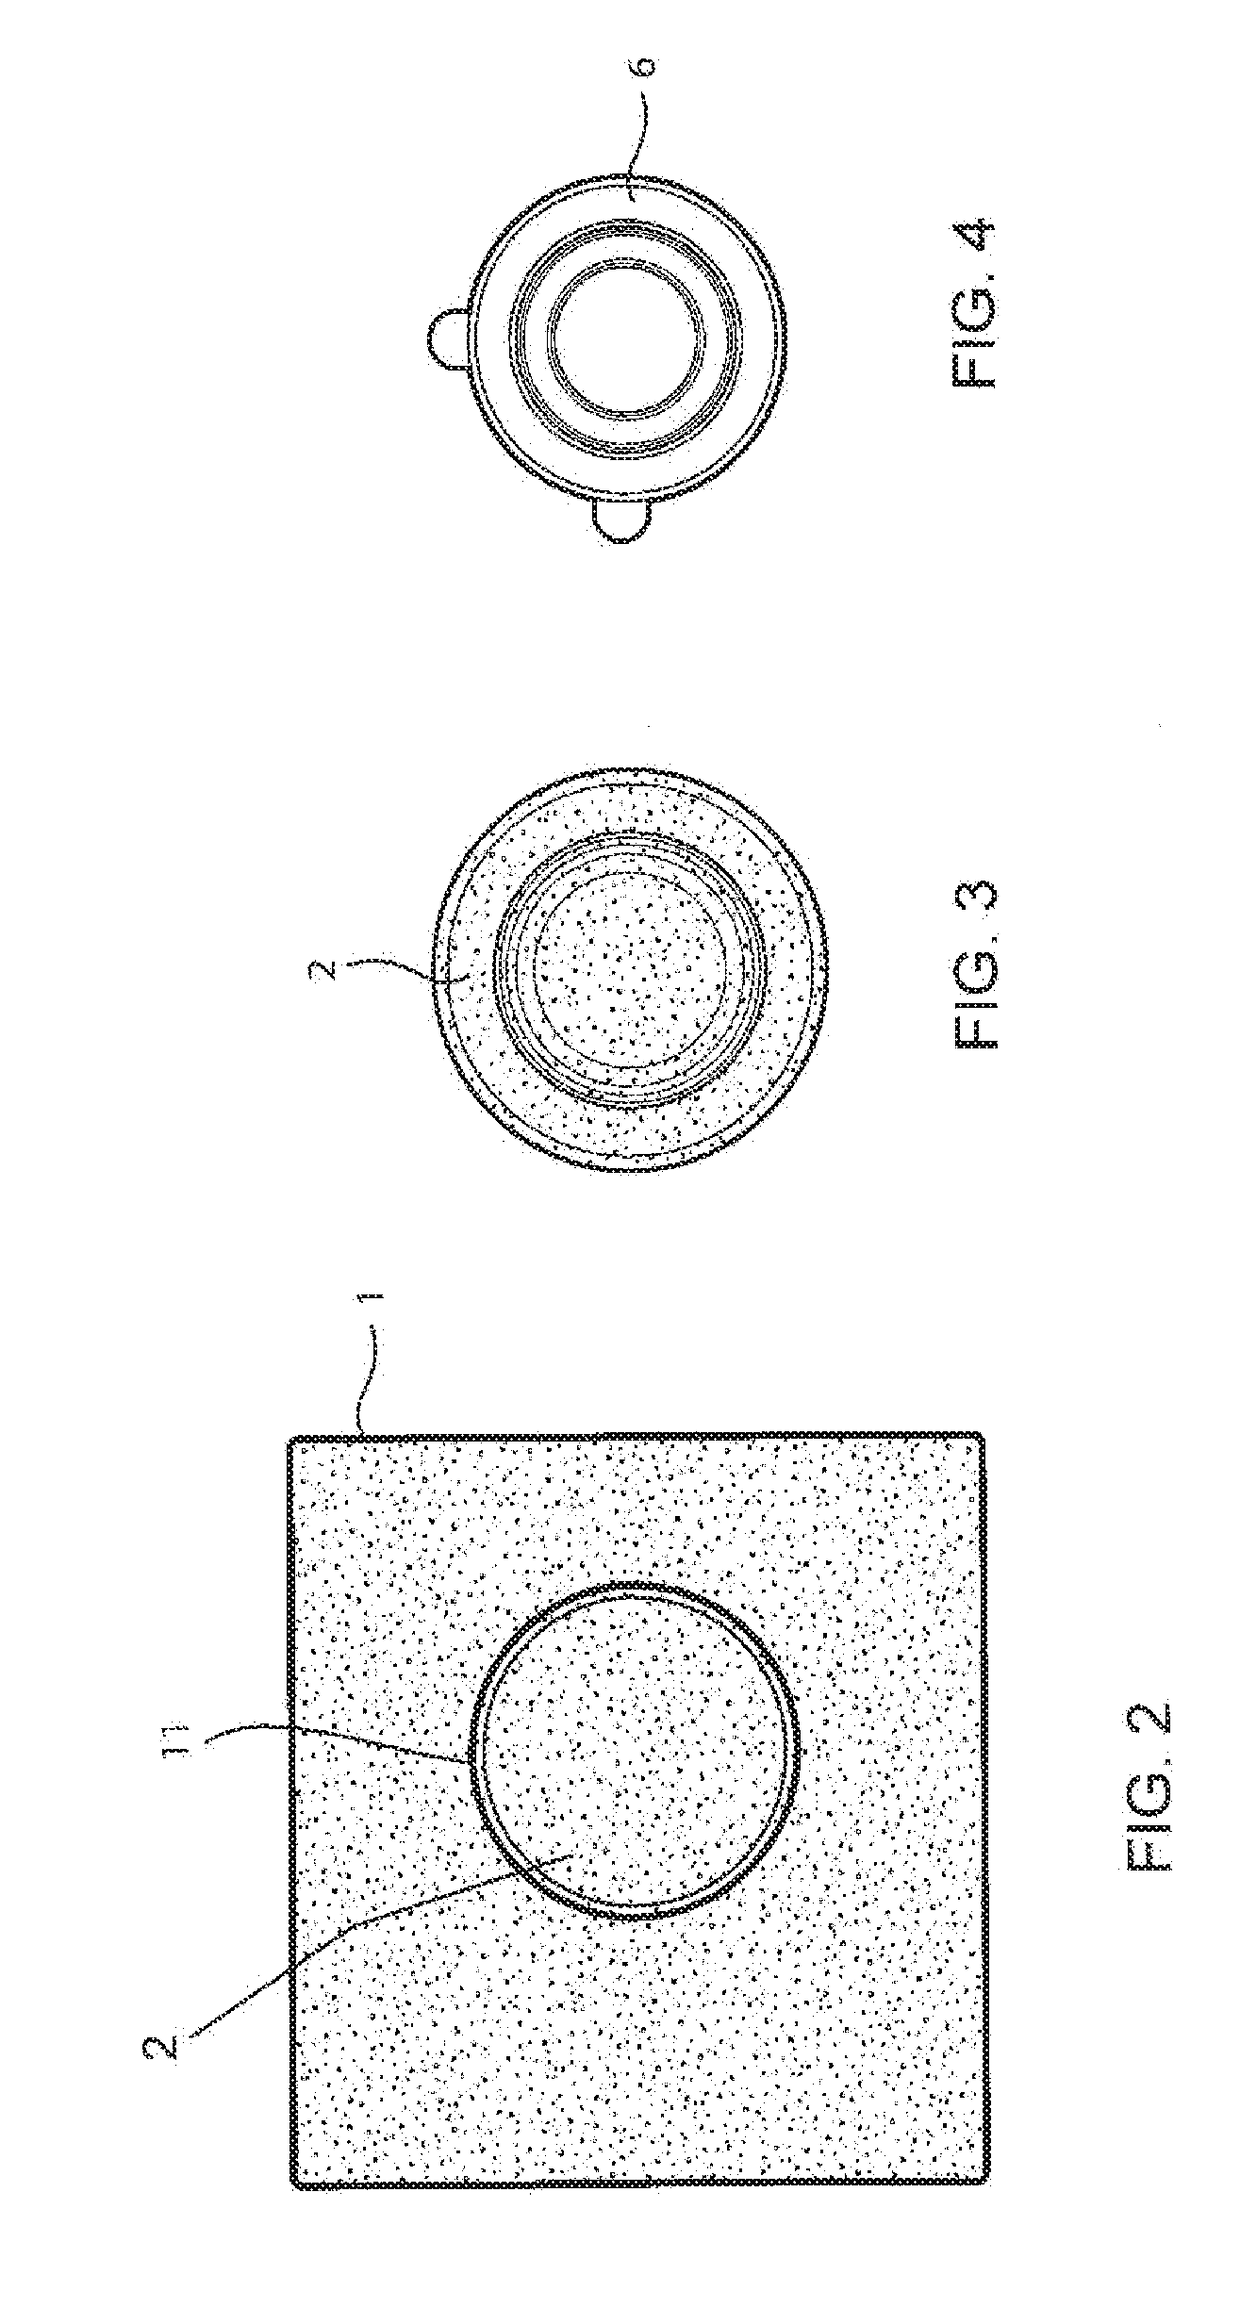 Post-tension cable protection system, method for installing the system and method for remediation of a defective post-tension reinforcement system